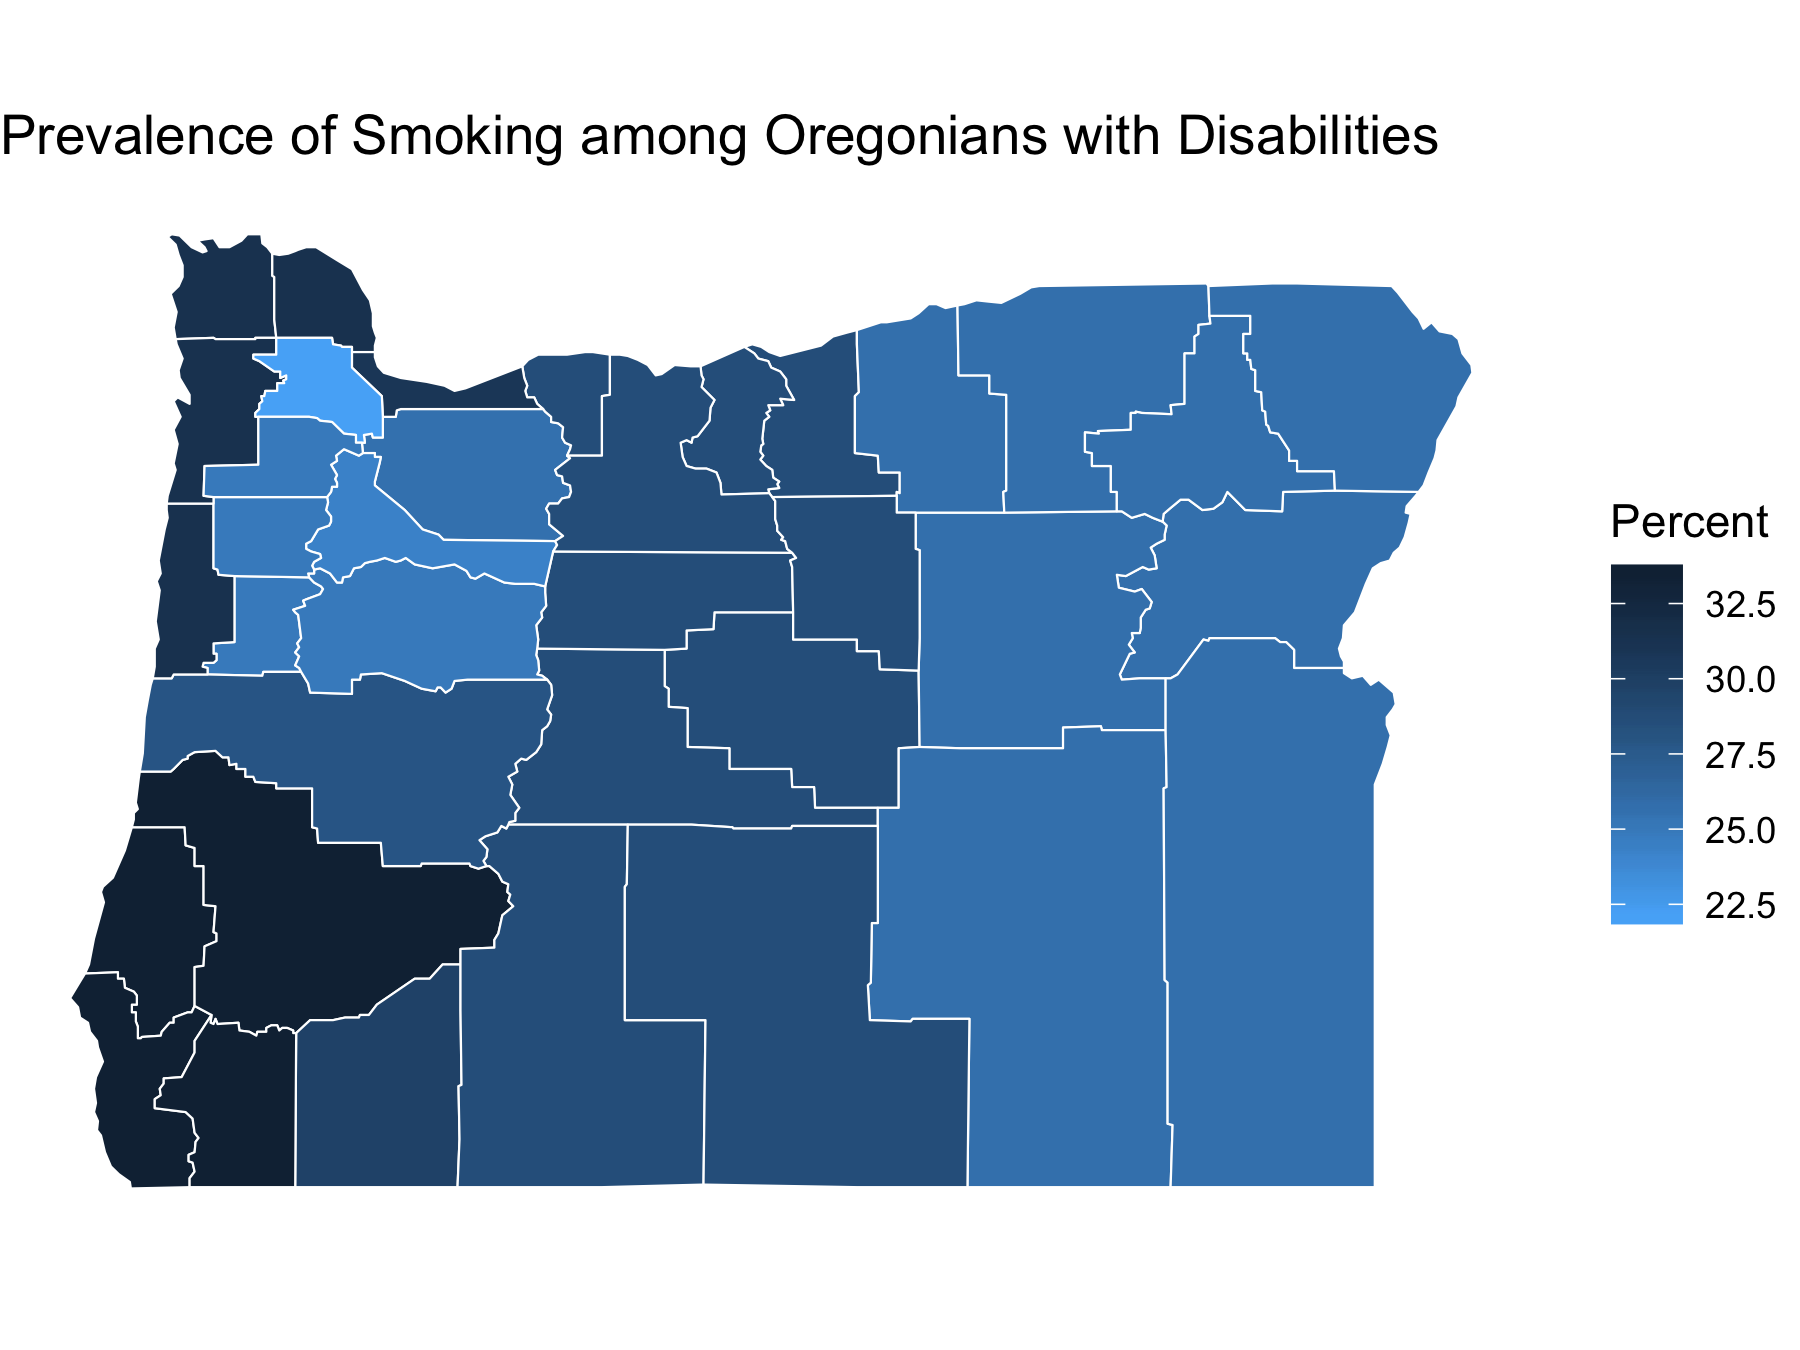 Blue Map of Oregon depicting prevalence of smoking among Oregonians with disabilities by county